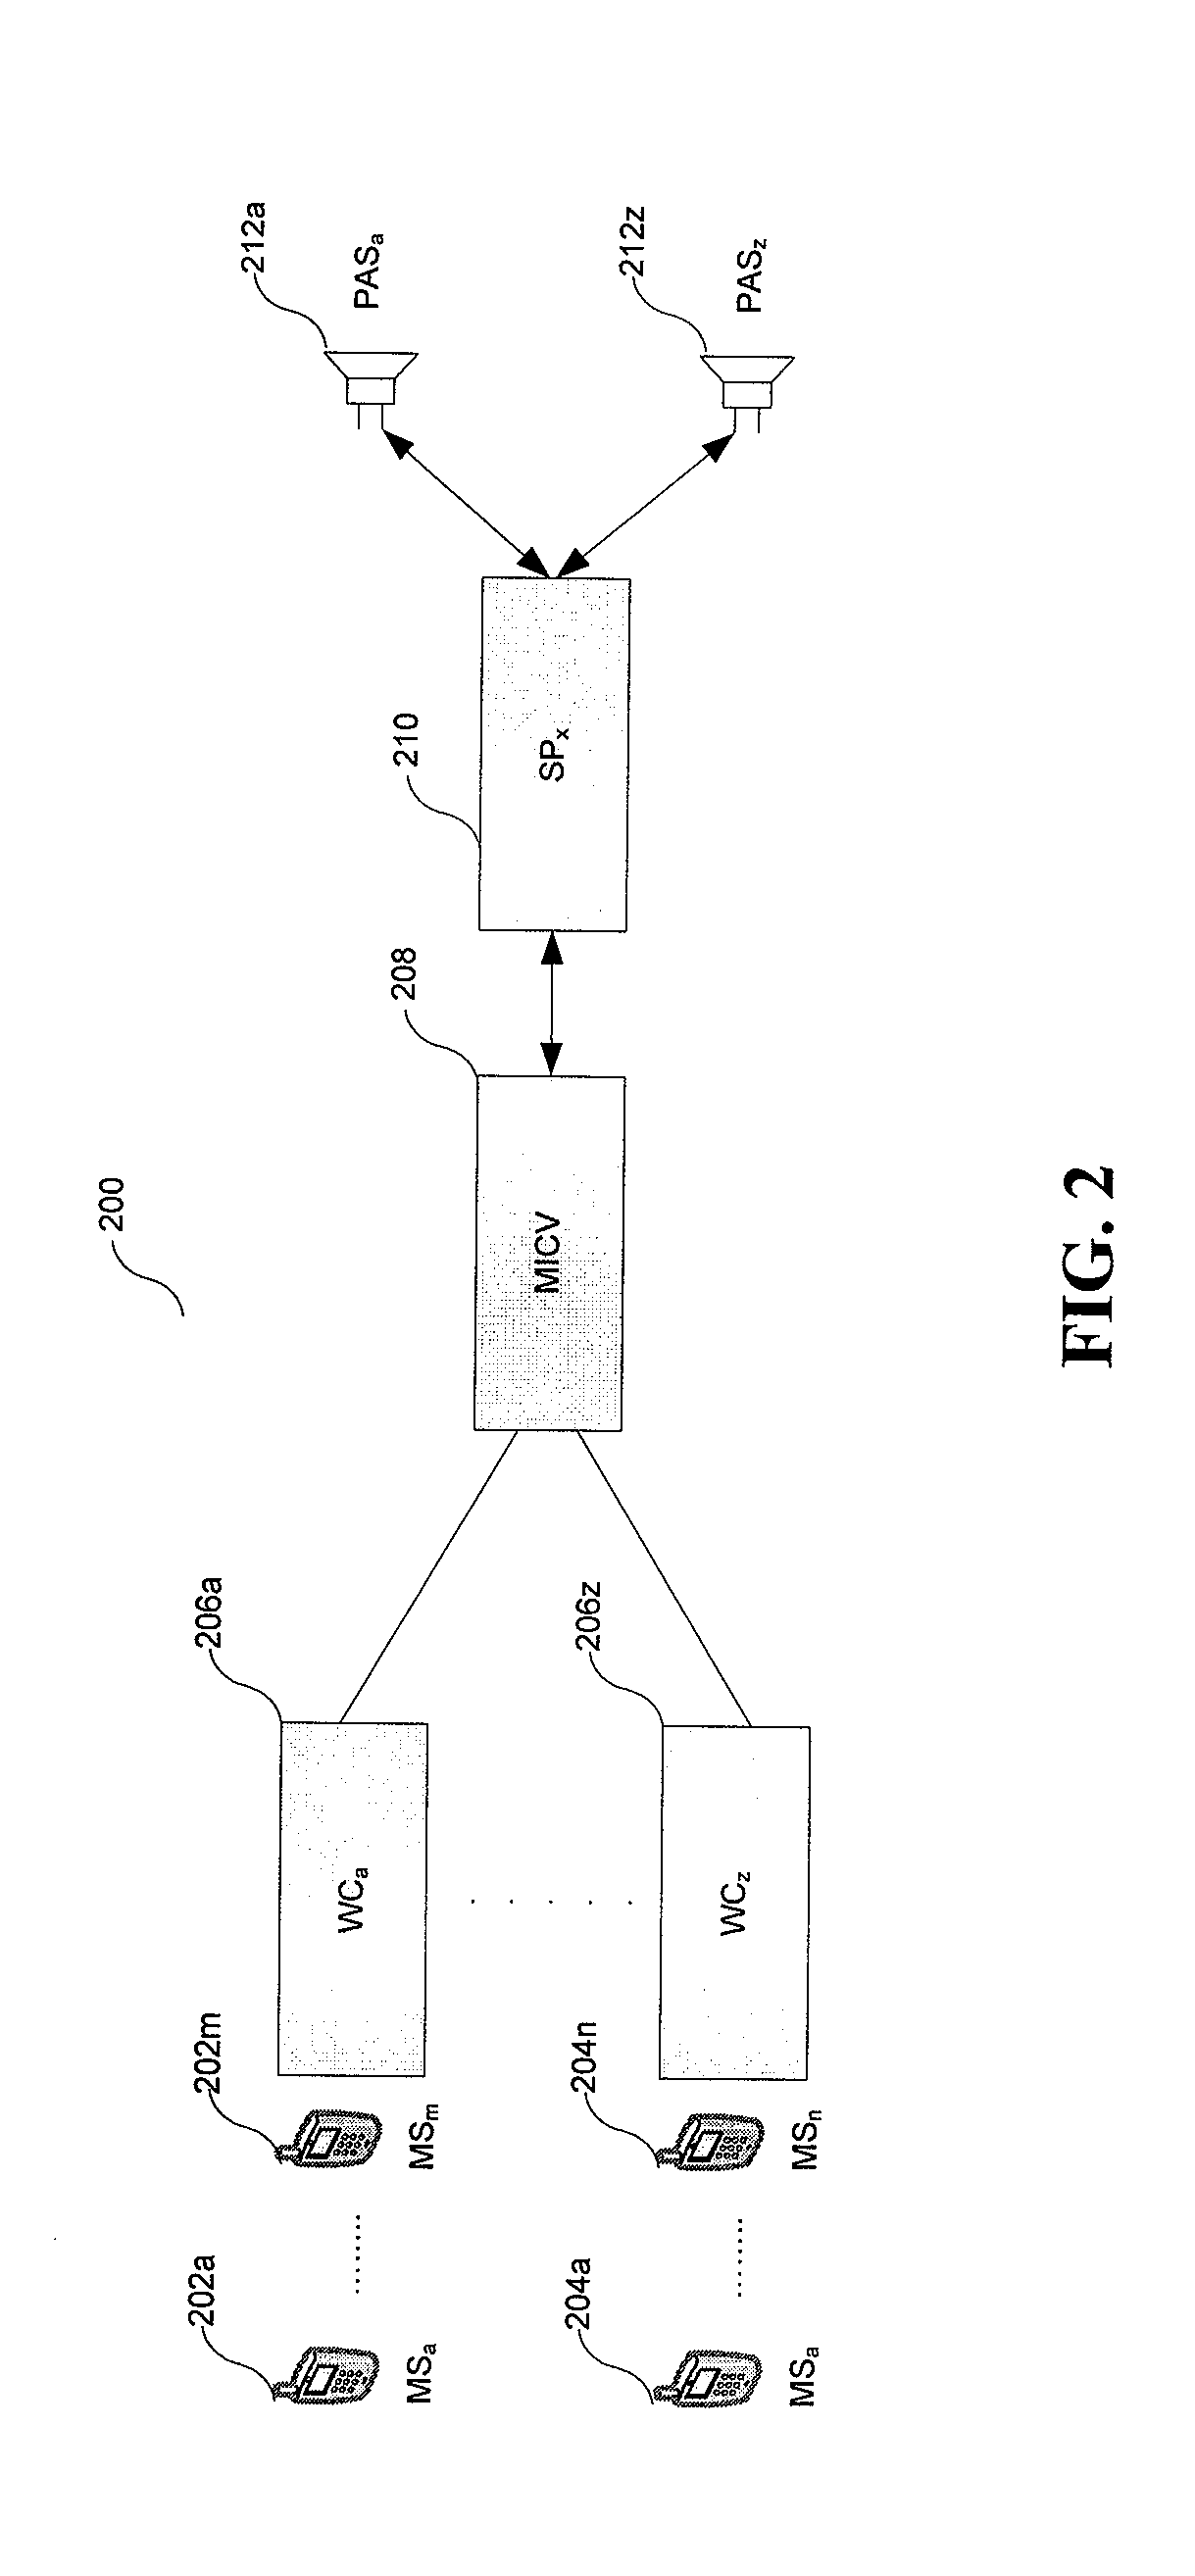 System and Method for Enhanced Public Address System